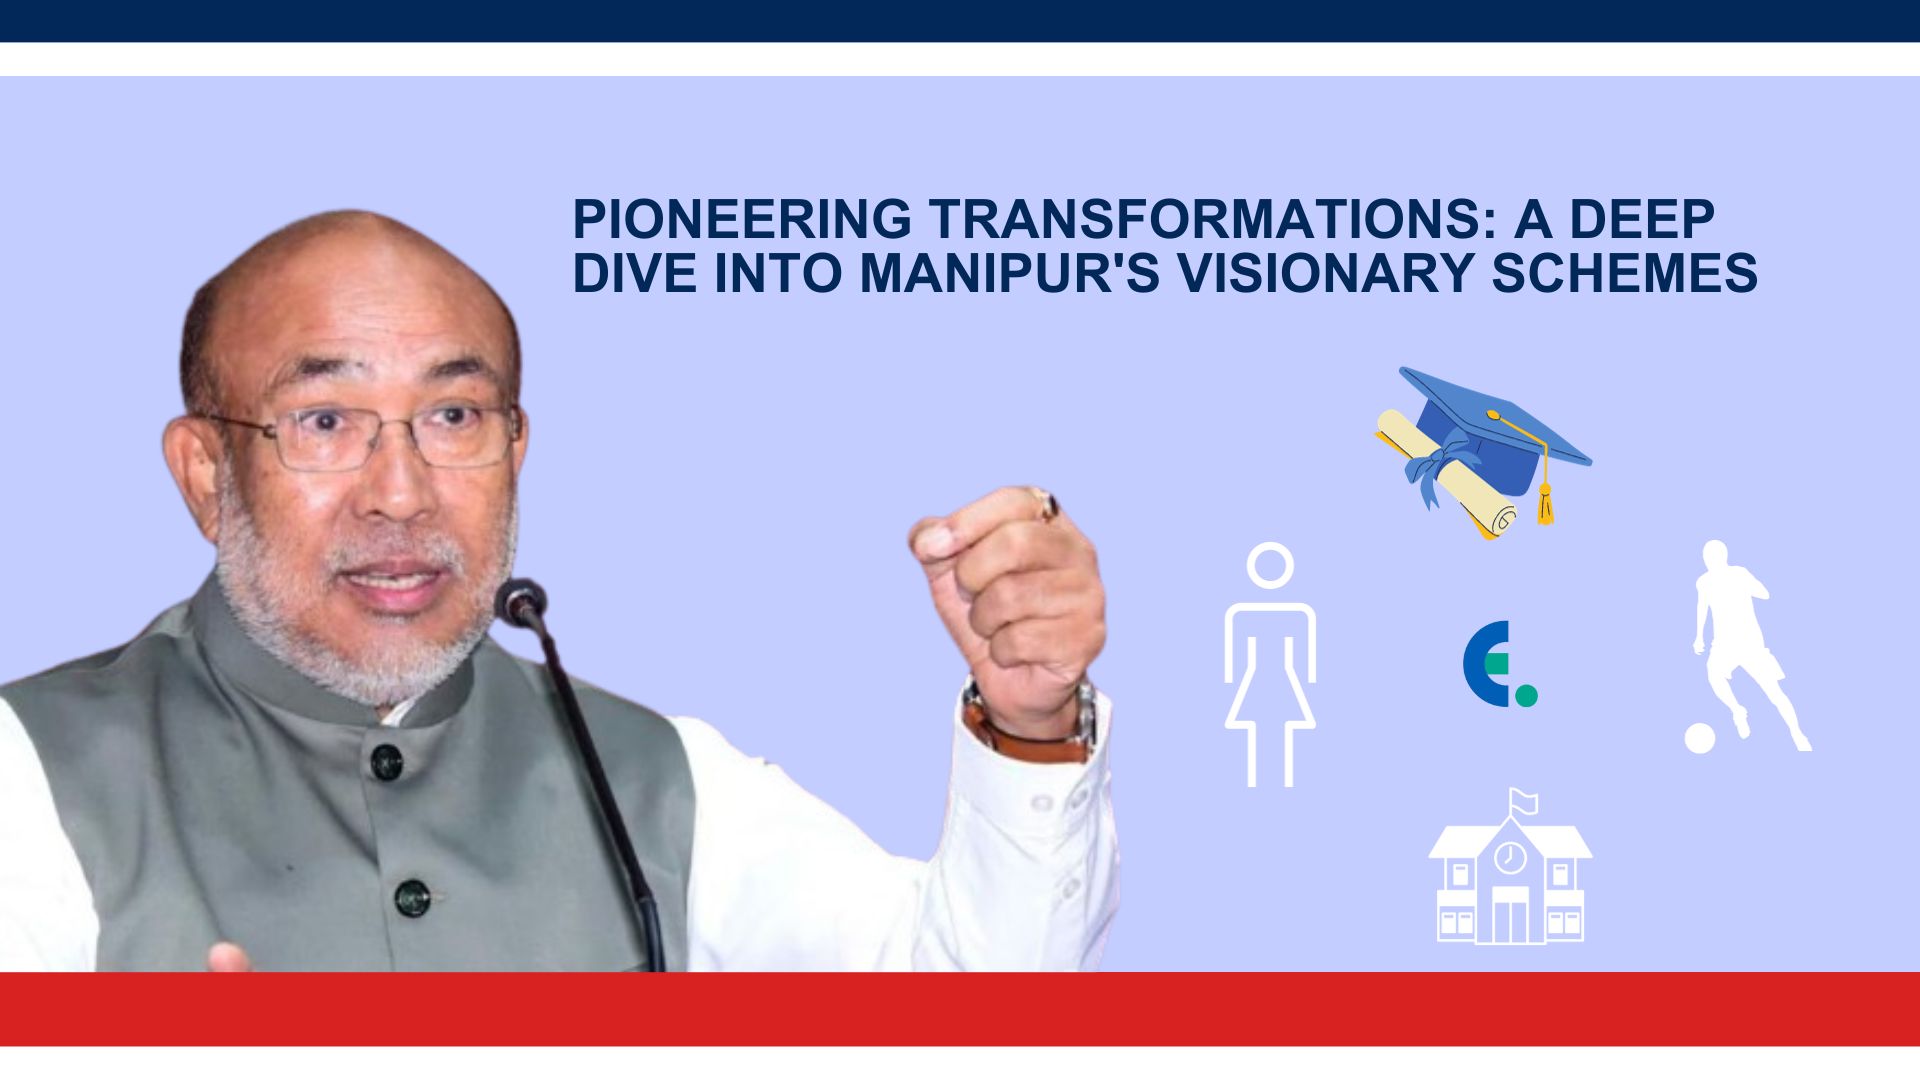 Pioneering Transformations: A Deep Dive into Manipur’s Visionary Schemes